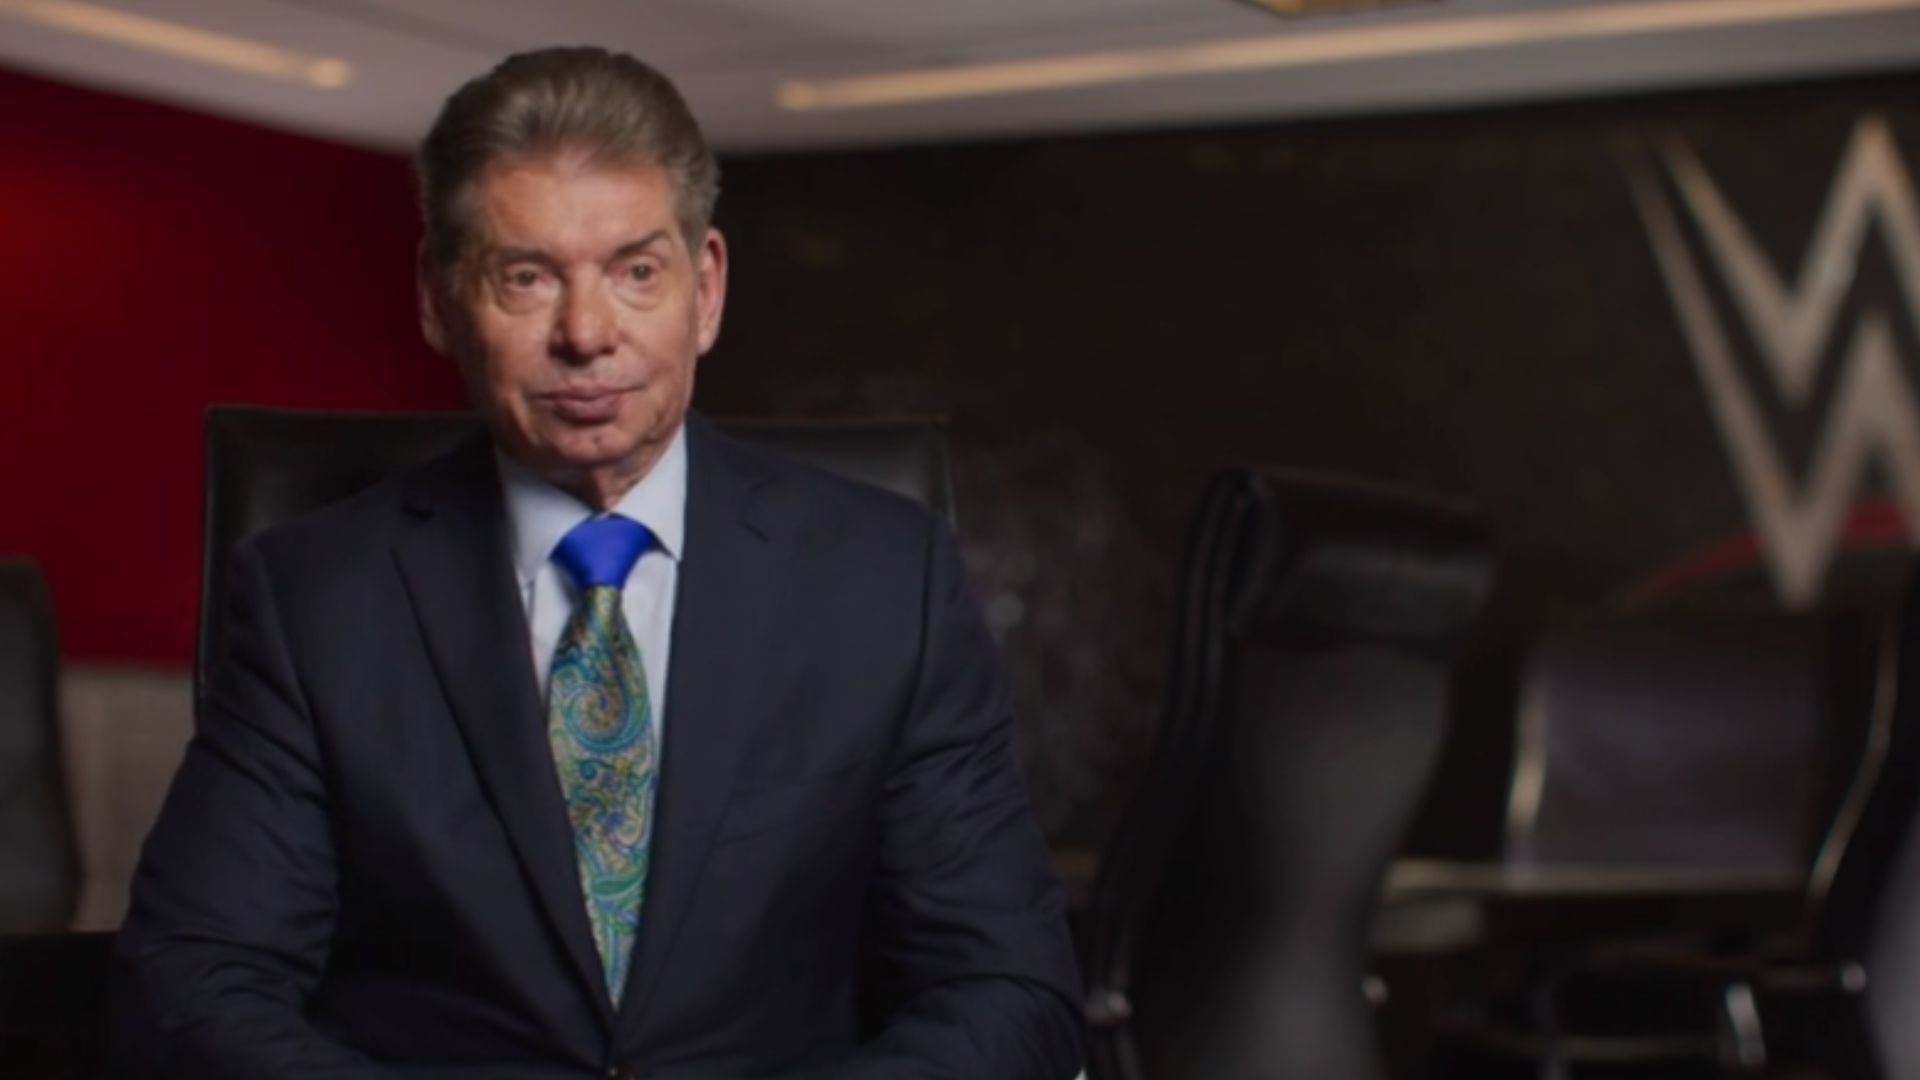 The WWE Chairman did not want anyone to share his name.